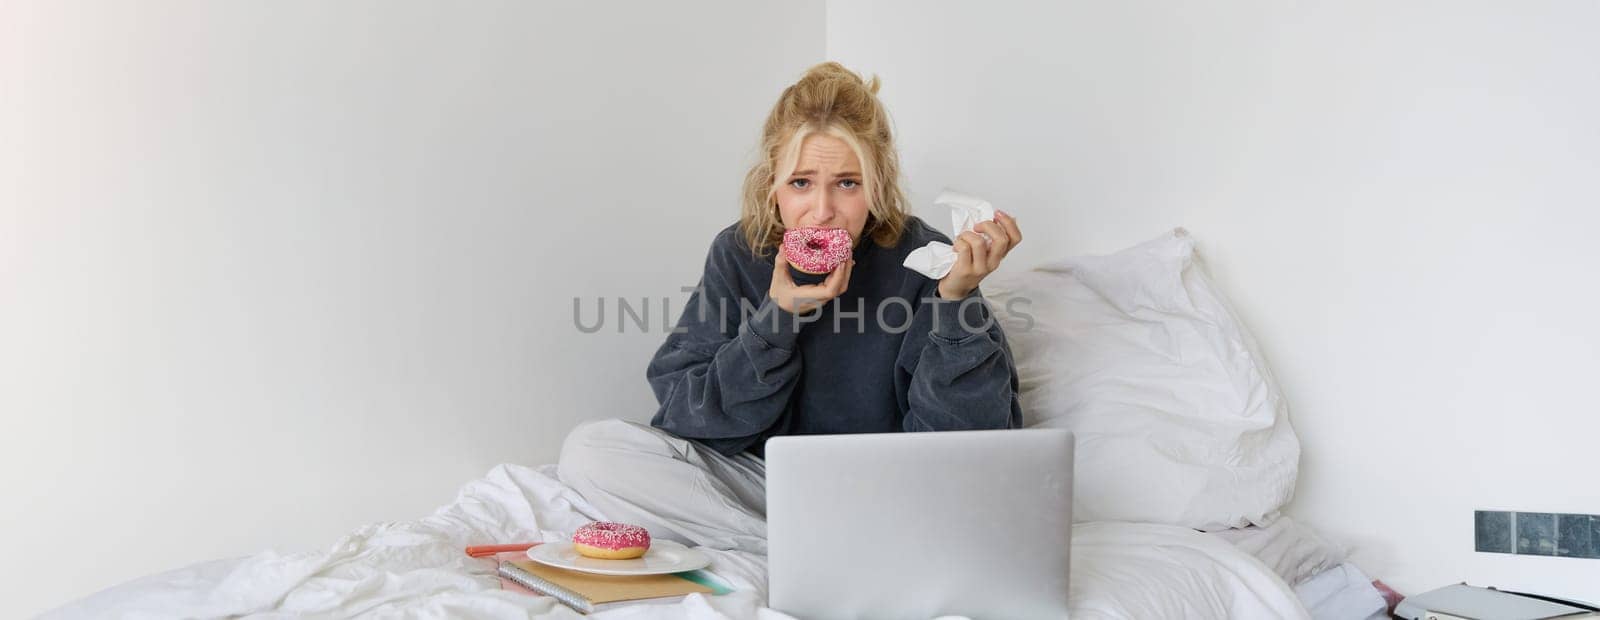 Portrait of sad woman crying, eating doughnut, wiping tears off, looking at something upsetting on laptop screen, sitting on a bed.